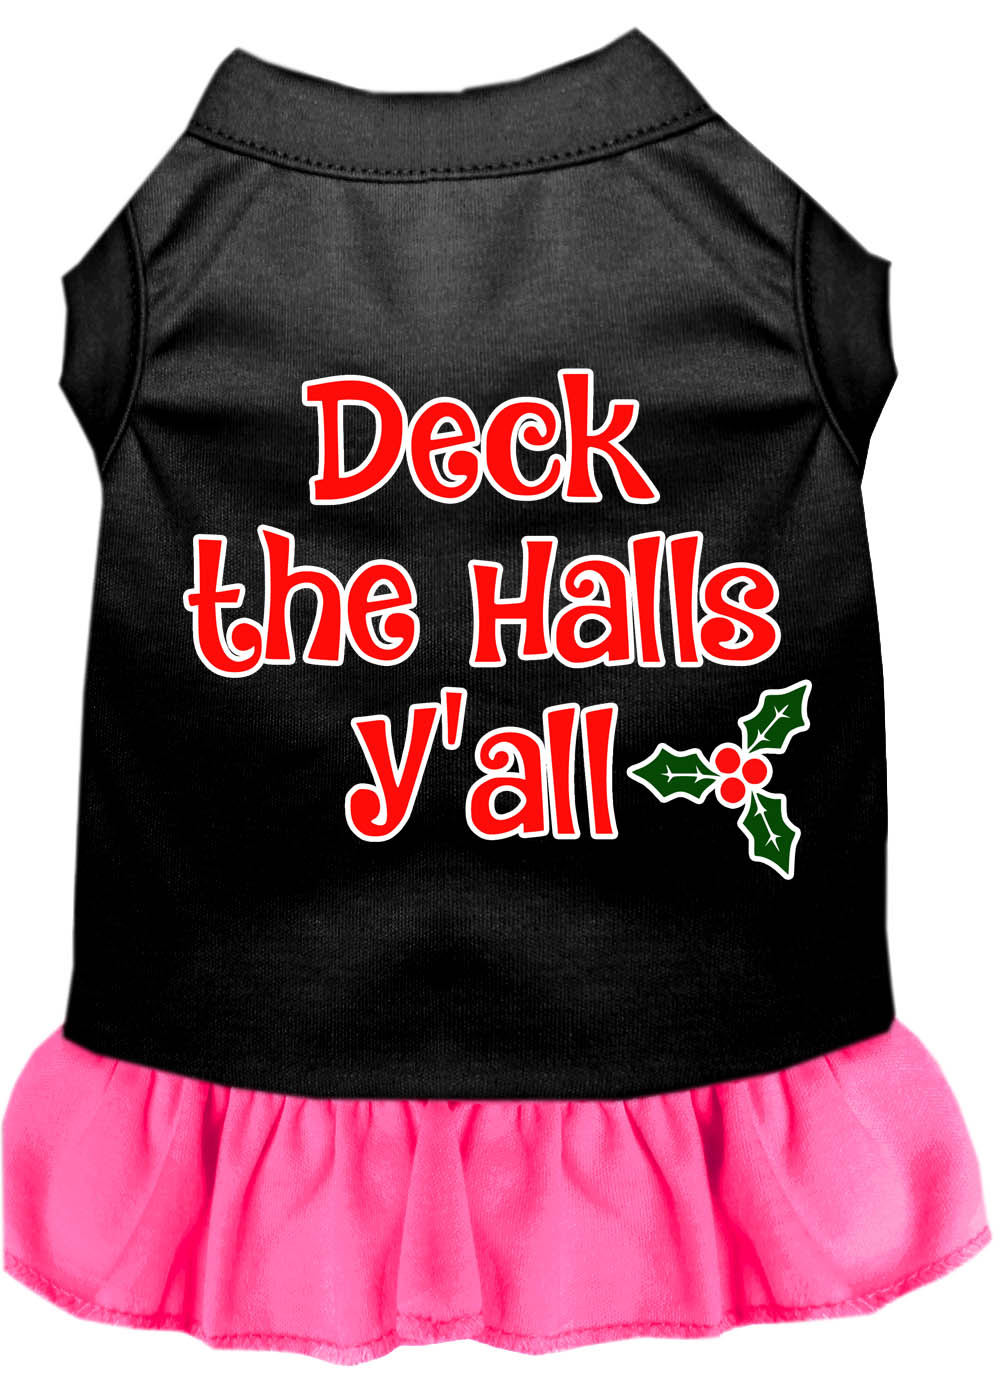 Deck the Halls Y'all Screen Print Dog Dress Black with Bright Pink XL